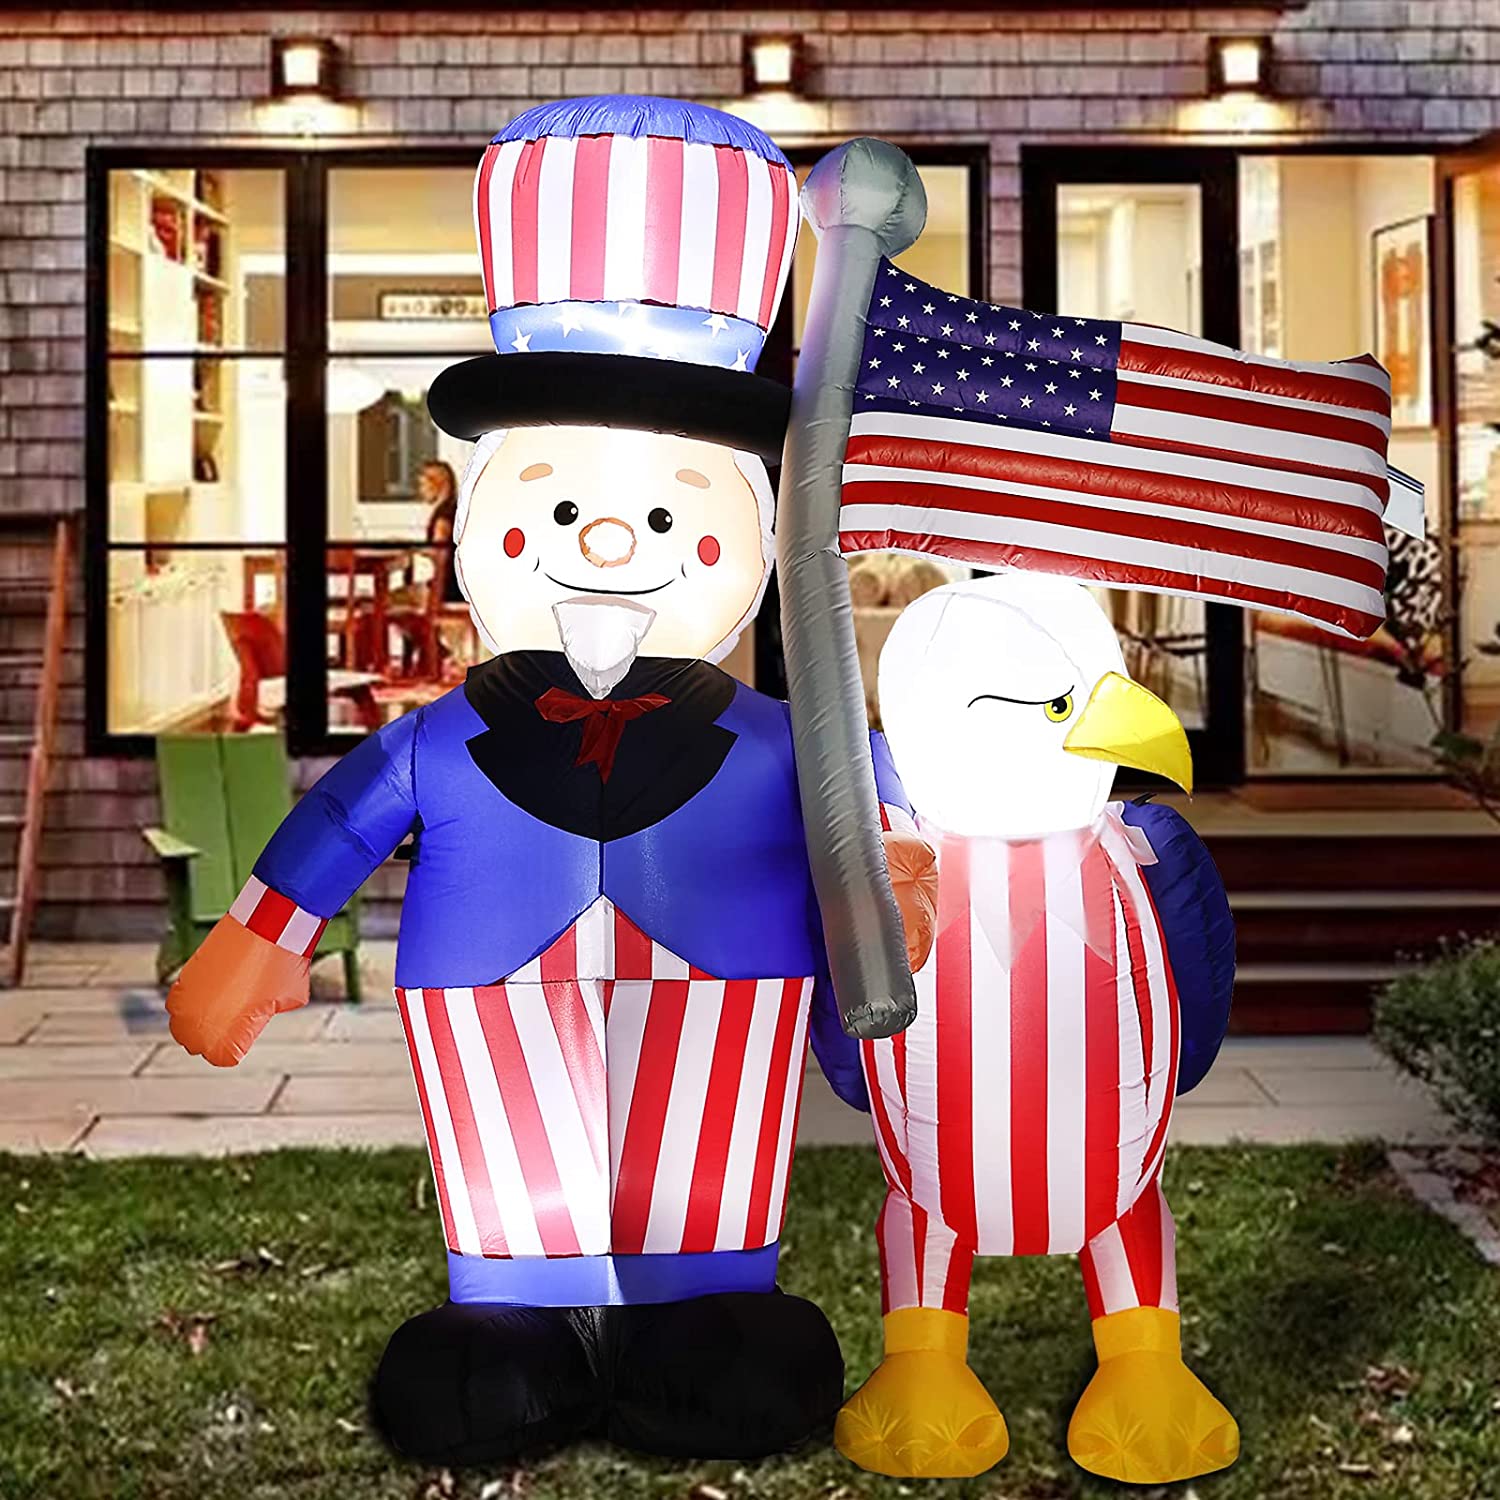 4th of July Inflatable Outdoor, 6Ft Tall Uncle Sam with Eagle American Flag Independence Day Inflatable Blow up Holiday Inflatables for Party, Garden, Yard, Lawn Decor (Uncle Sam with Eagle)